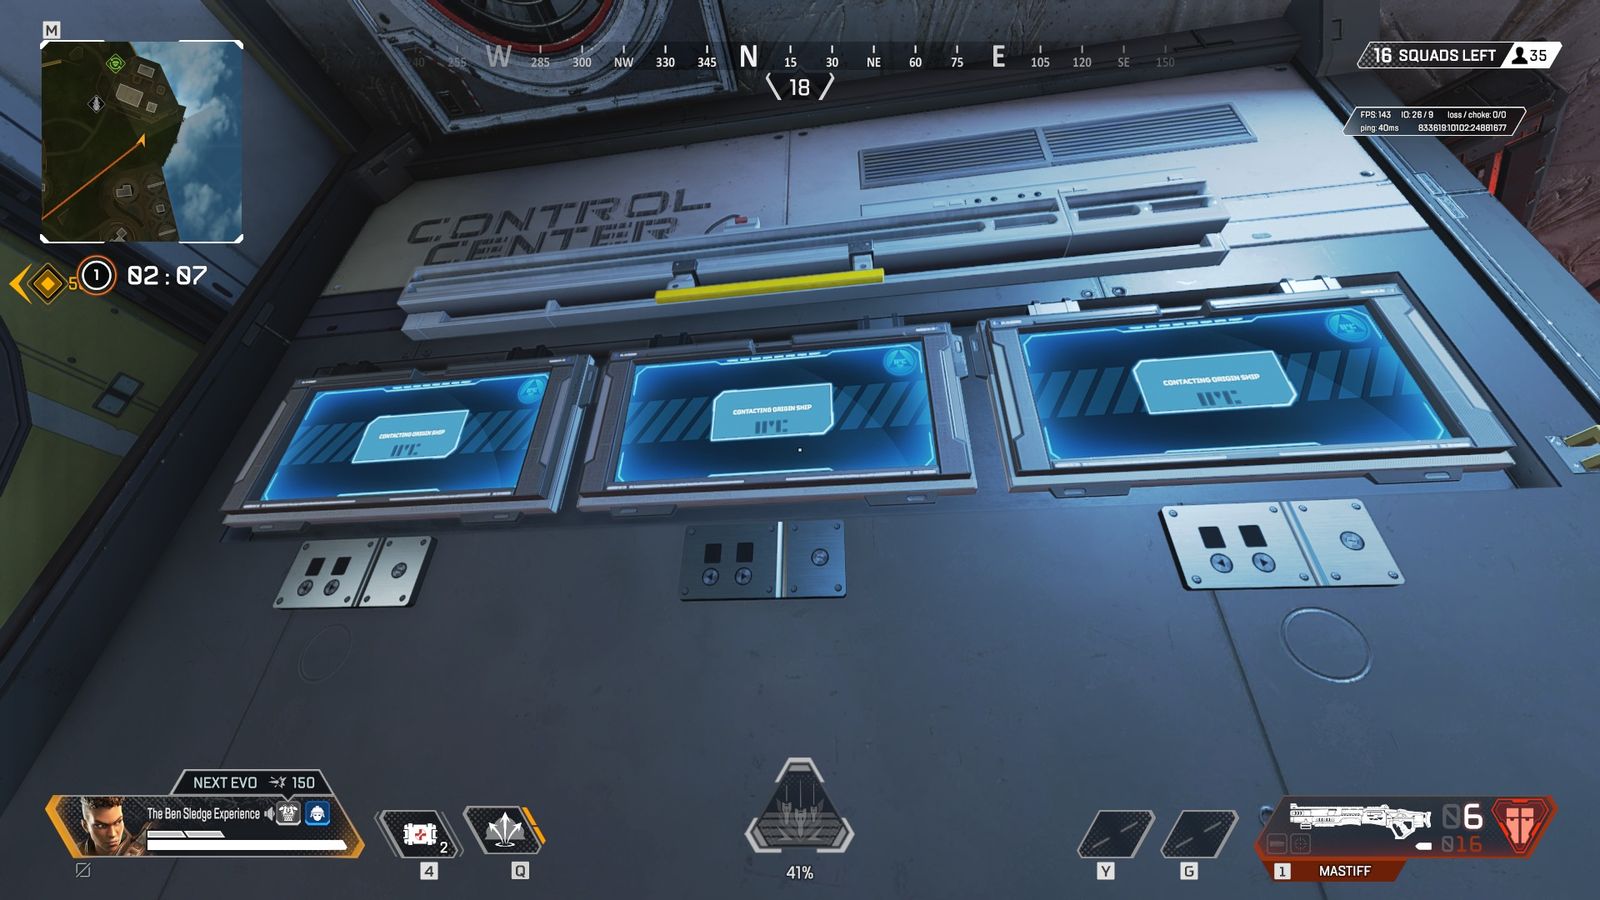 Three blue screens on a spaceship which say "contacting origin ship" on them.